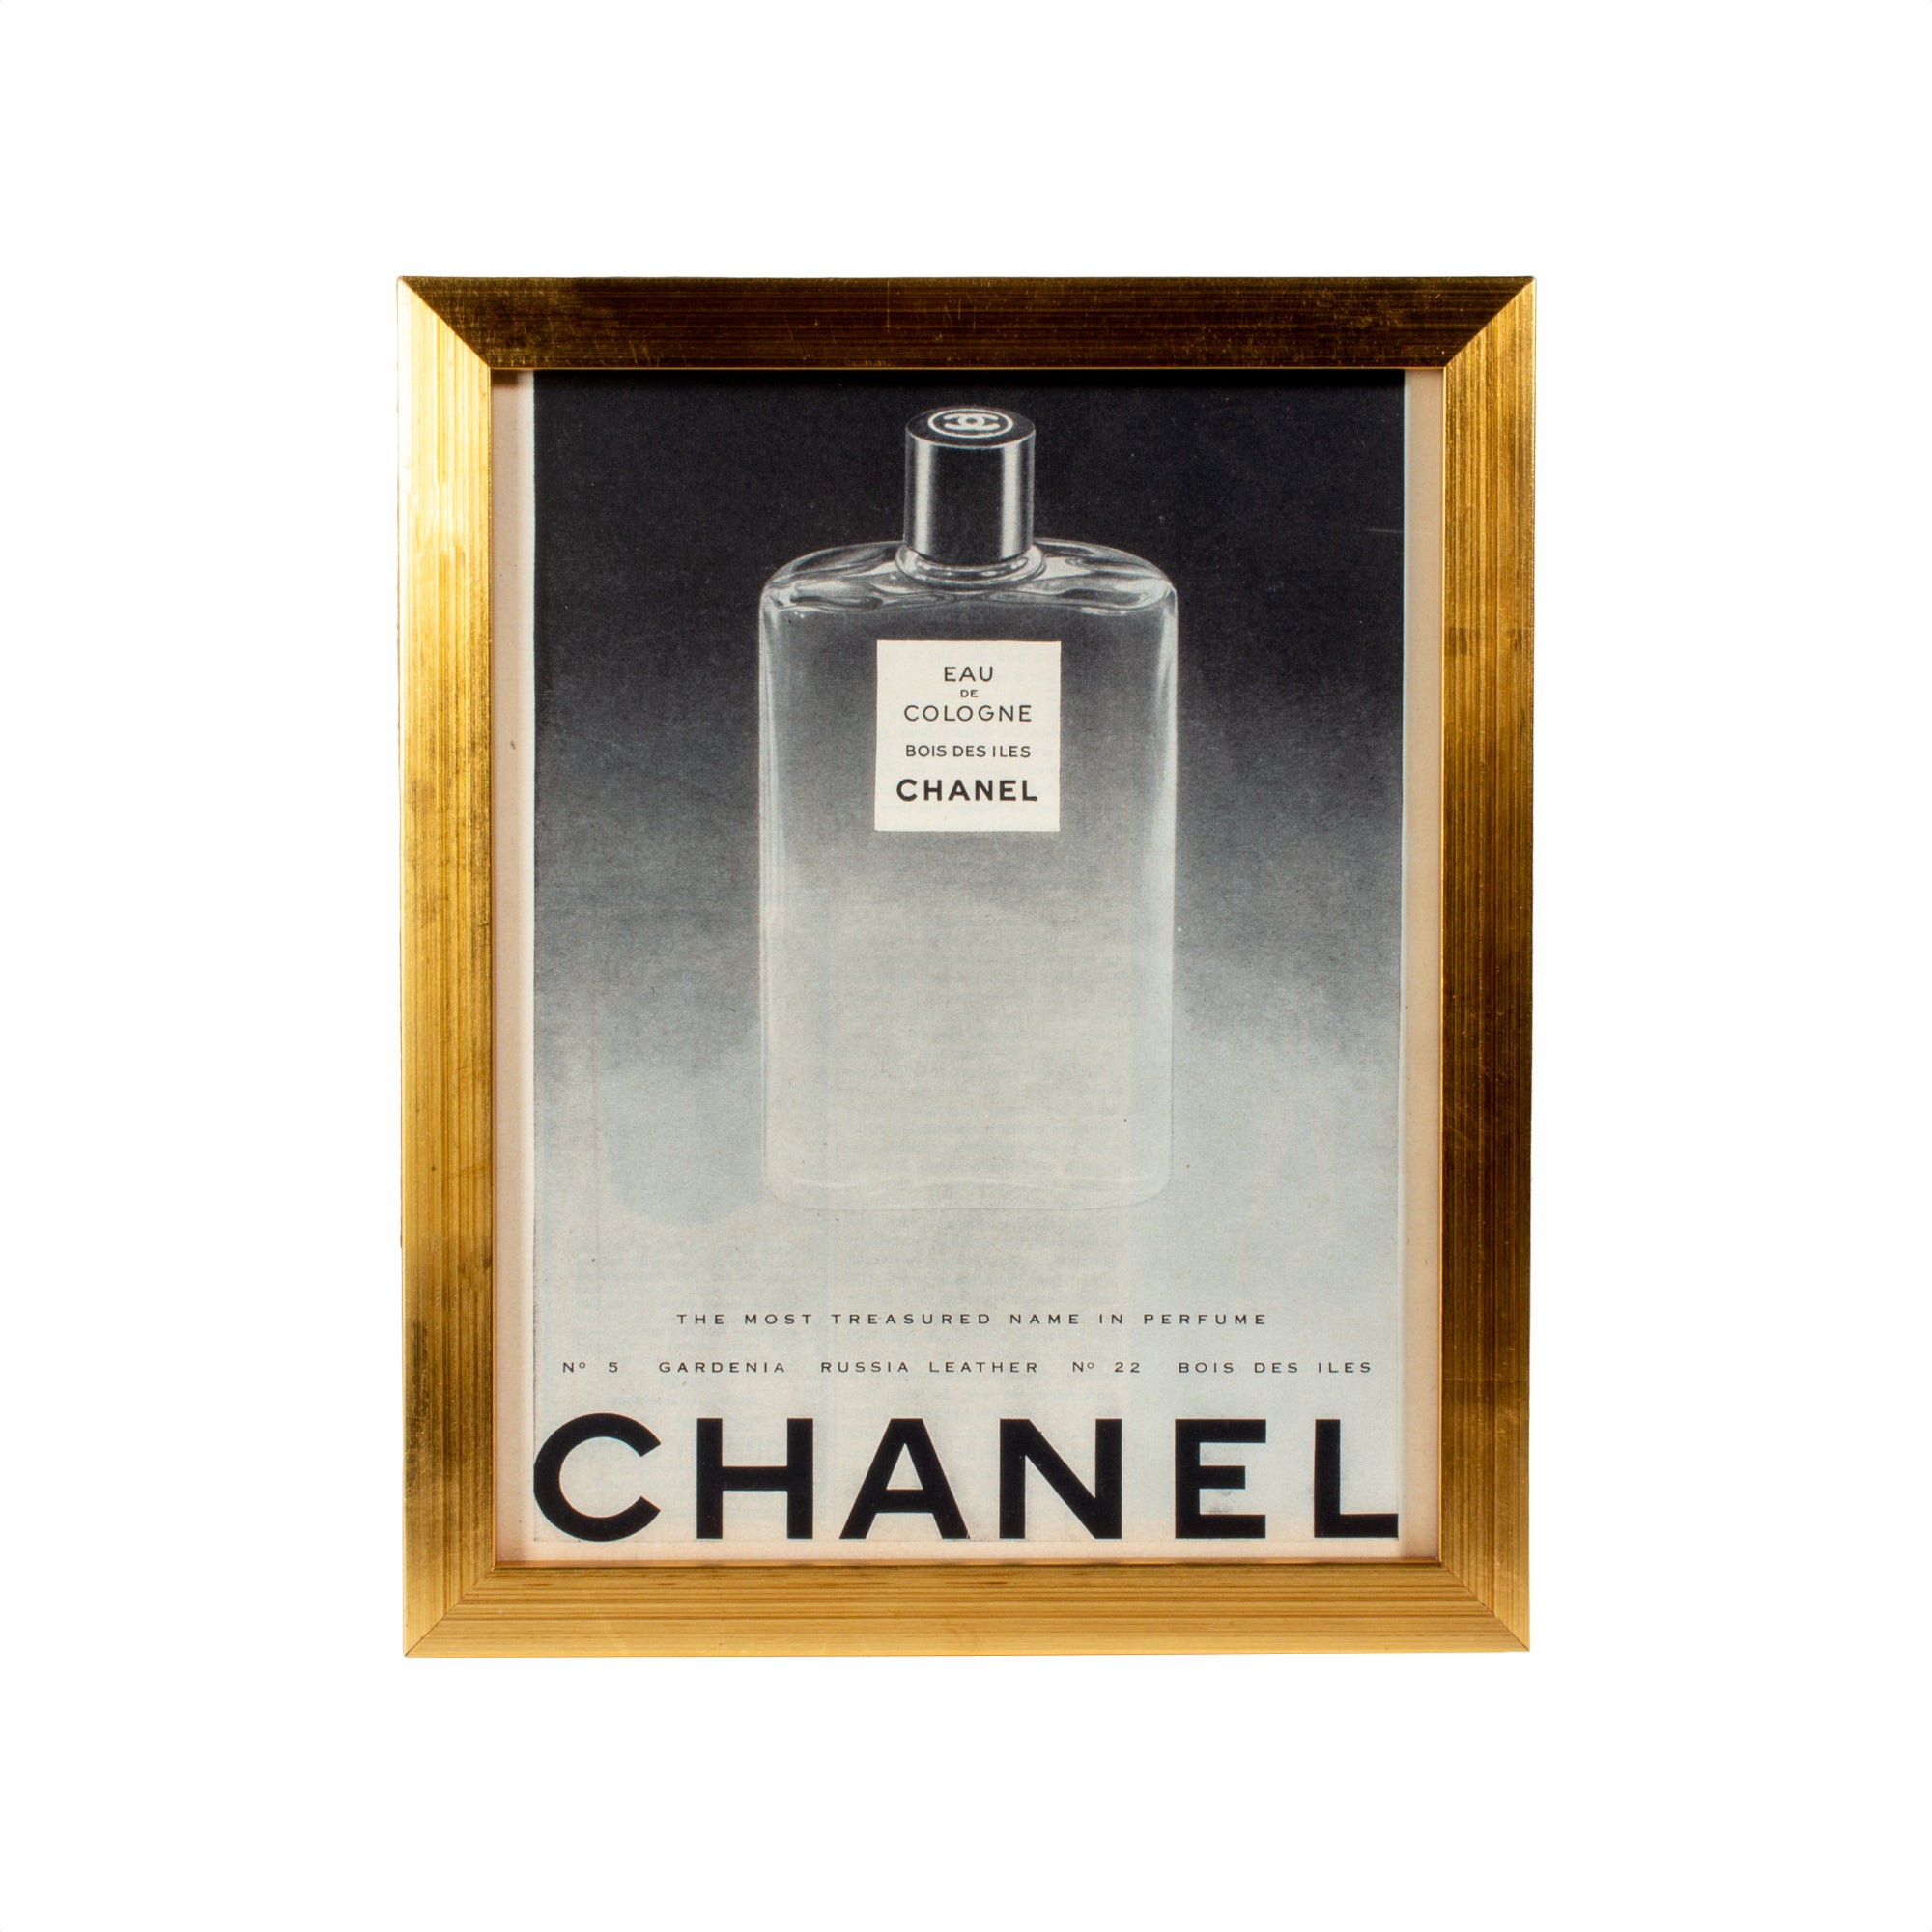 Vintage French Chanel Cologne Advertisement – Laurier Blanc